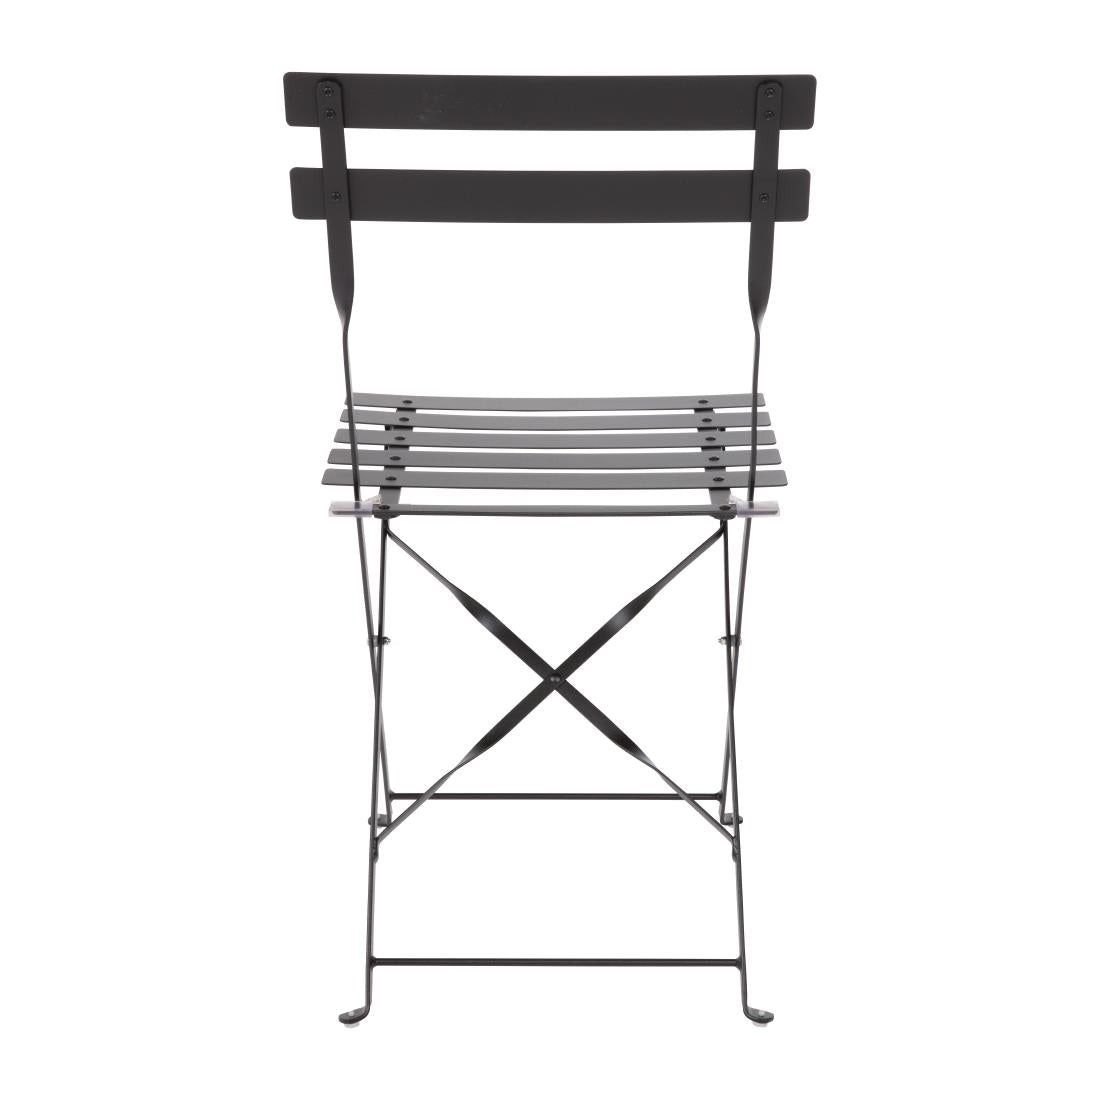 Bolero Pavement Style Steel Chairs (Pack of 2) JD Catering Equipment Solutions Ltd